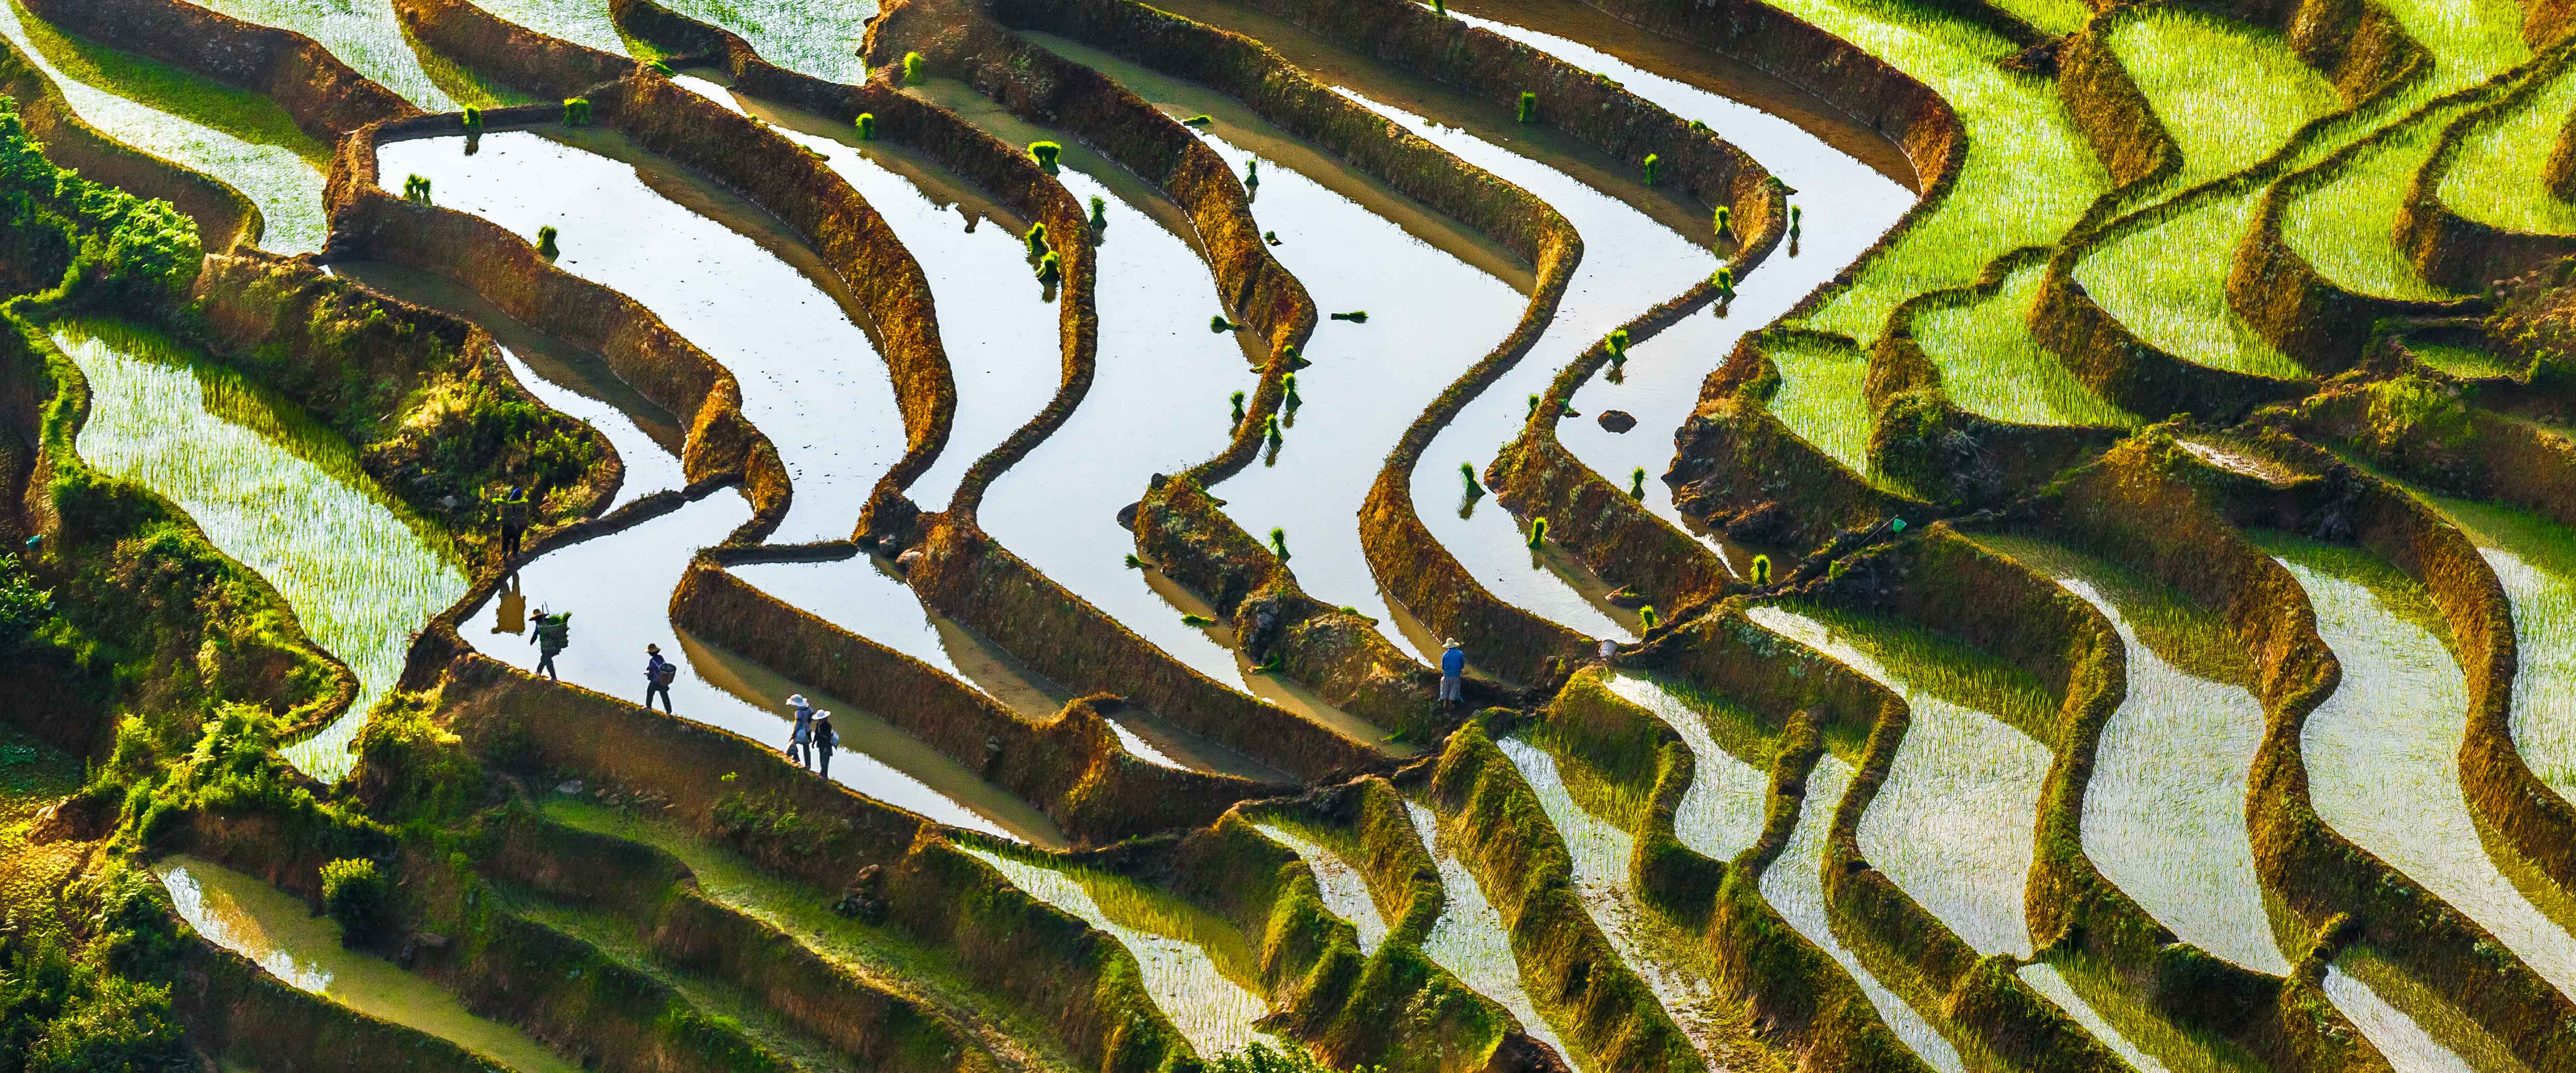 Terraced rice fields in China